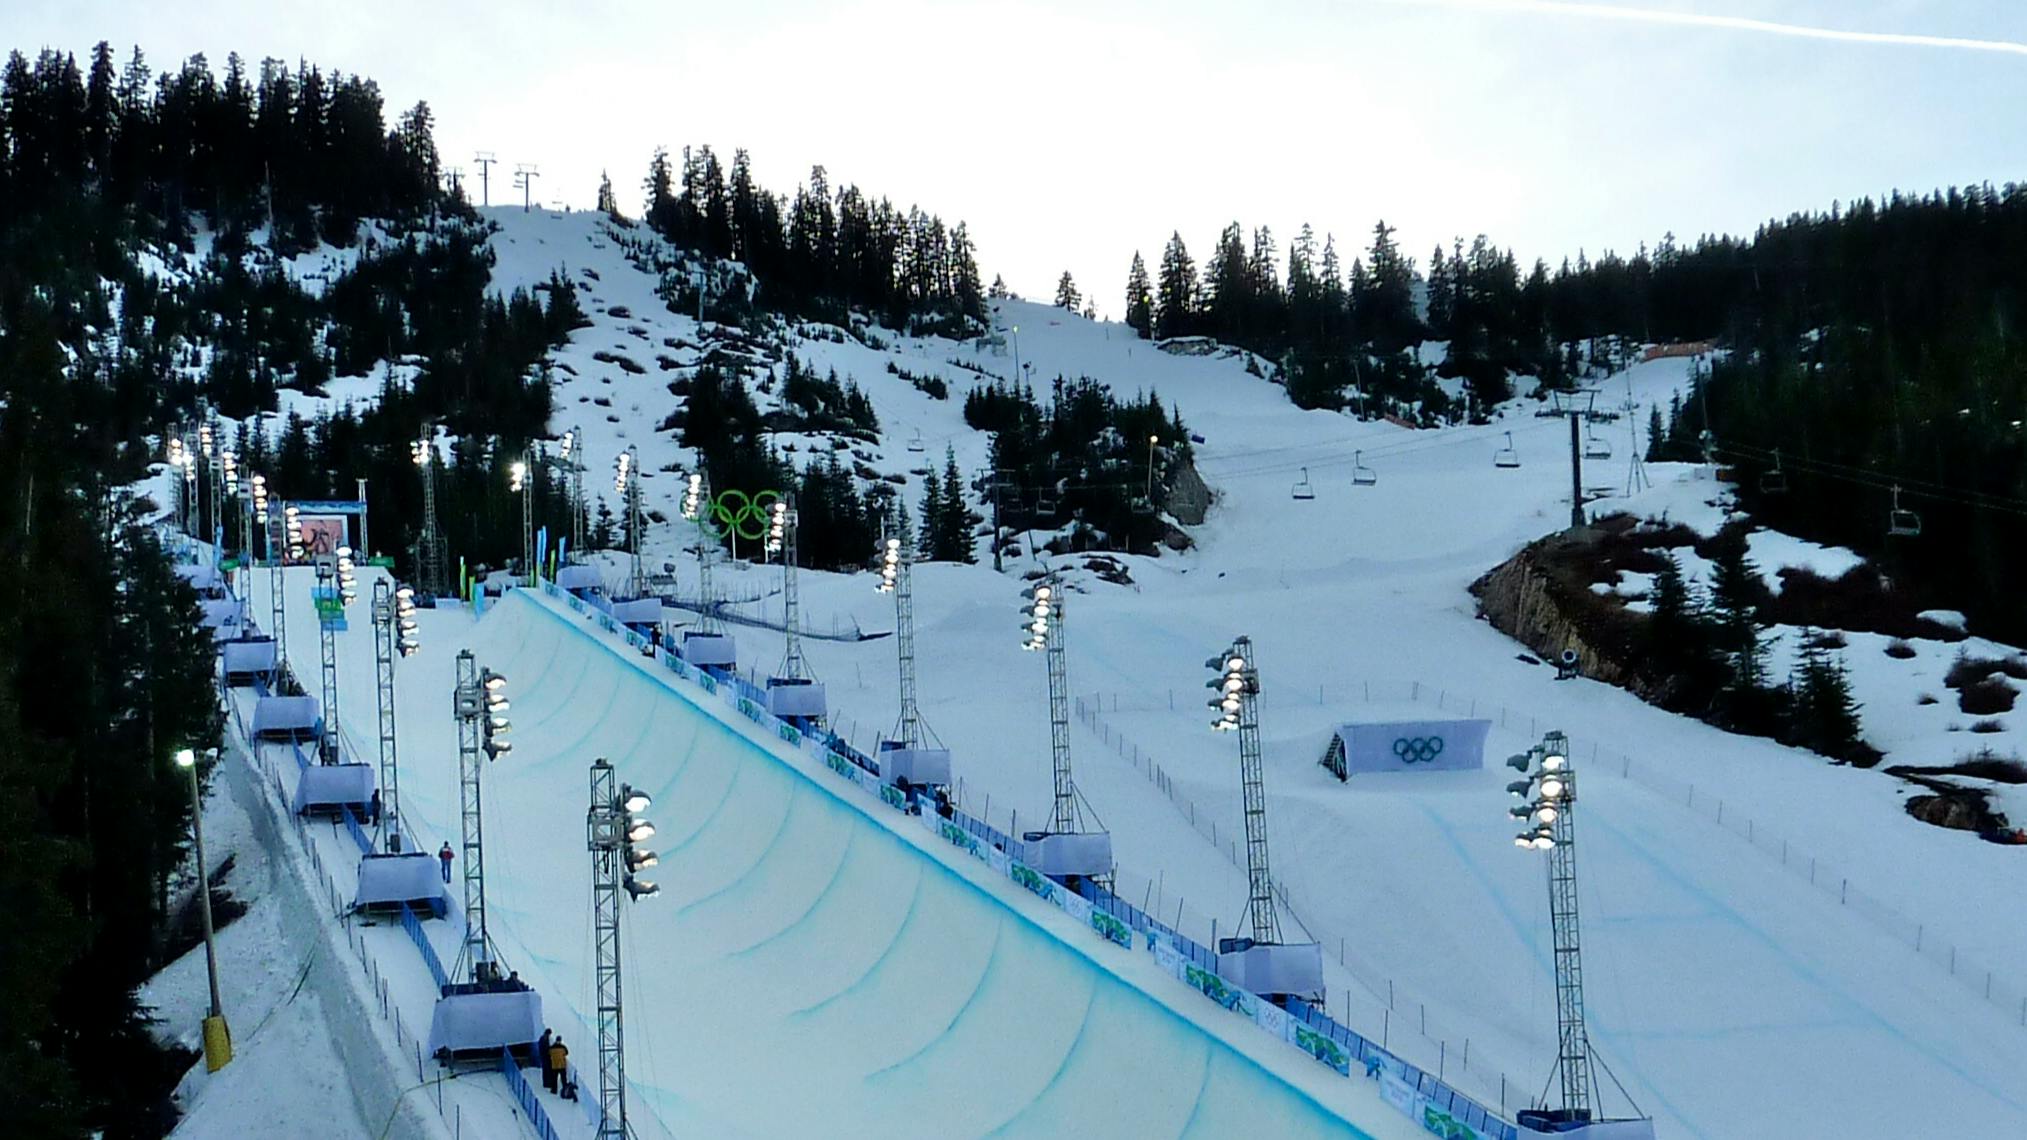 The Olympic halfpipe in Vancouver.